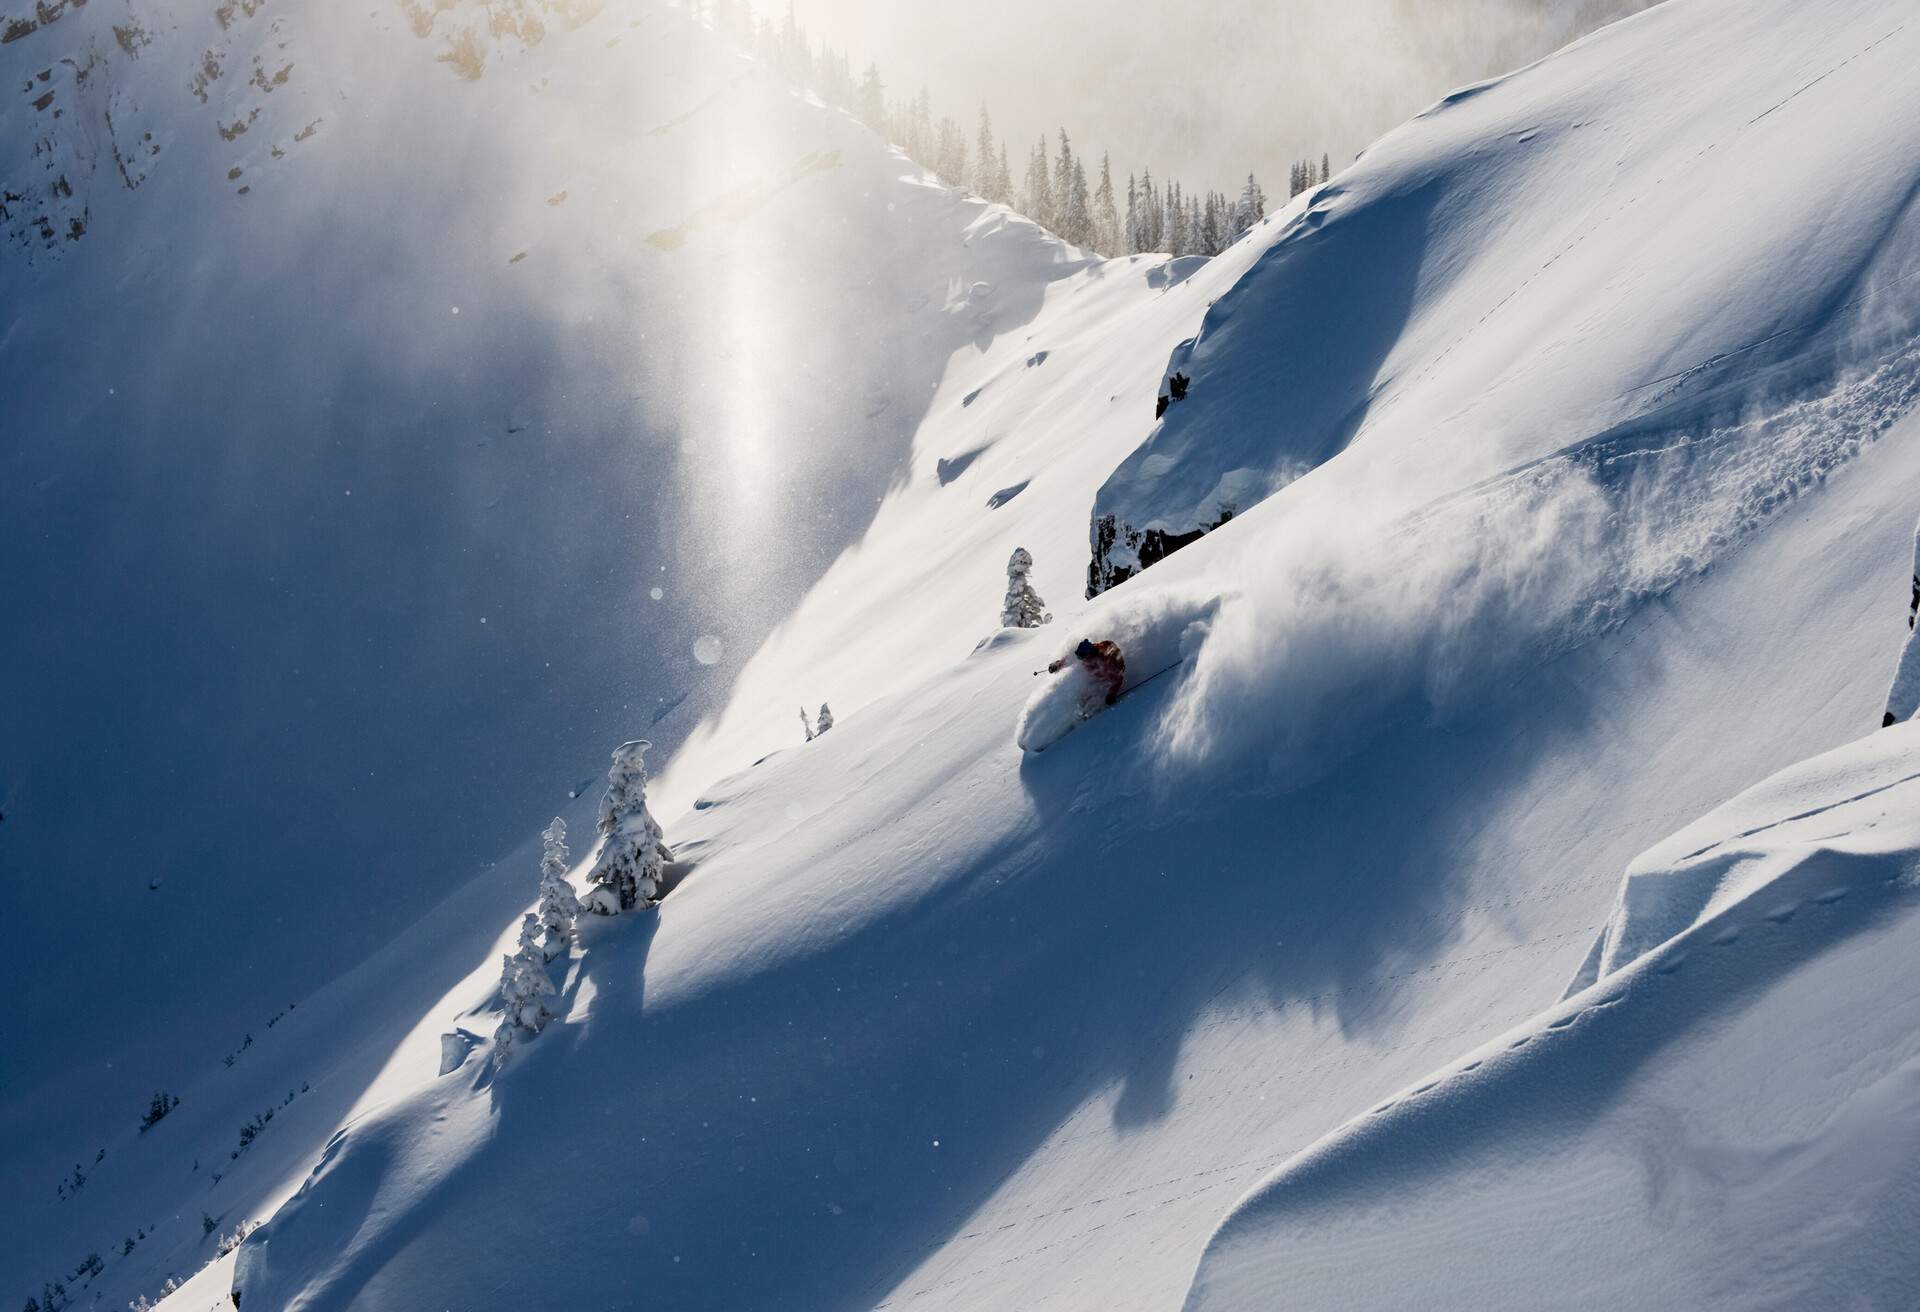 Man off-piste skiing deep powder snow in the backcountry terrain at Kicking Horse Mountain Resort in Golden, British Columbia, Canada. Situated on the British Columbia Powder Highway in Canada, the Kicking Horse Ski Resort is located 14km outside the logging town of Golden.